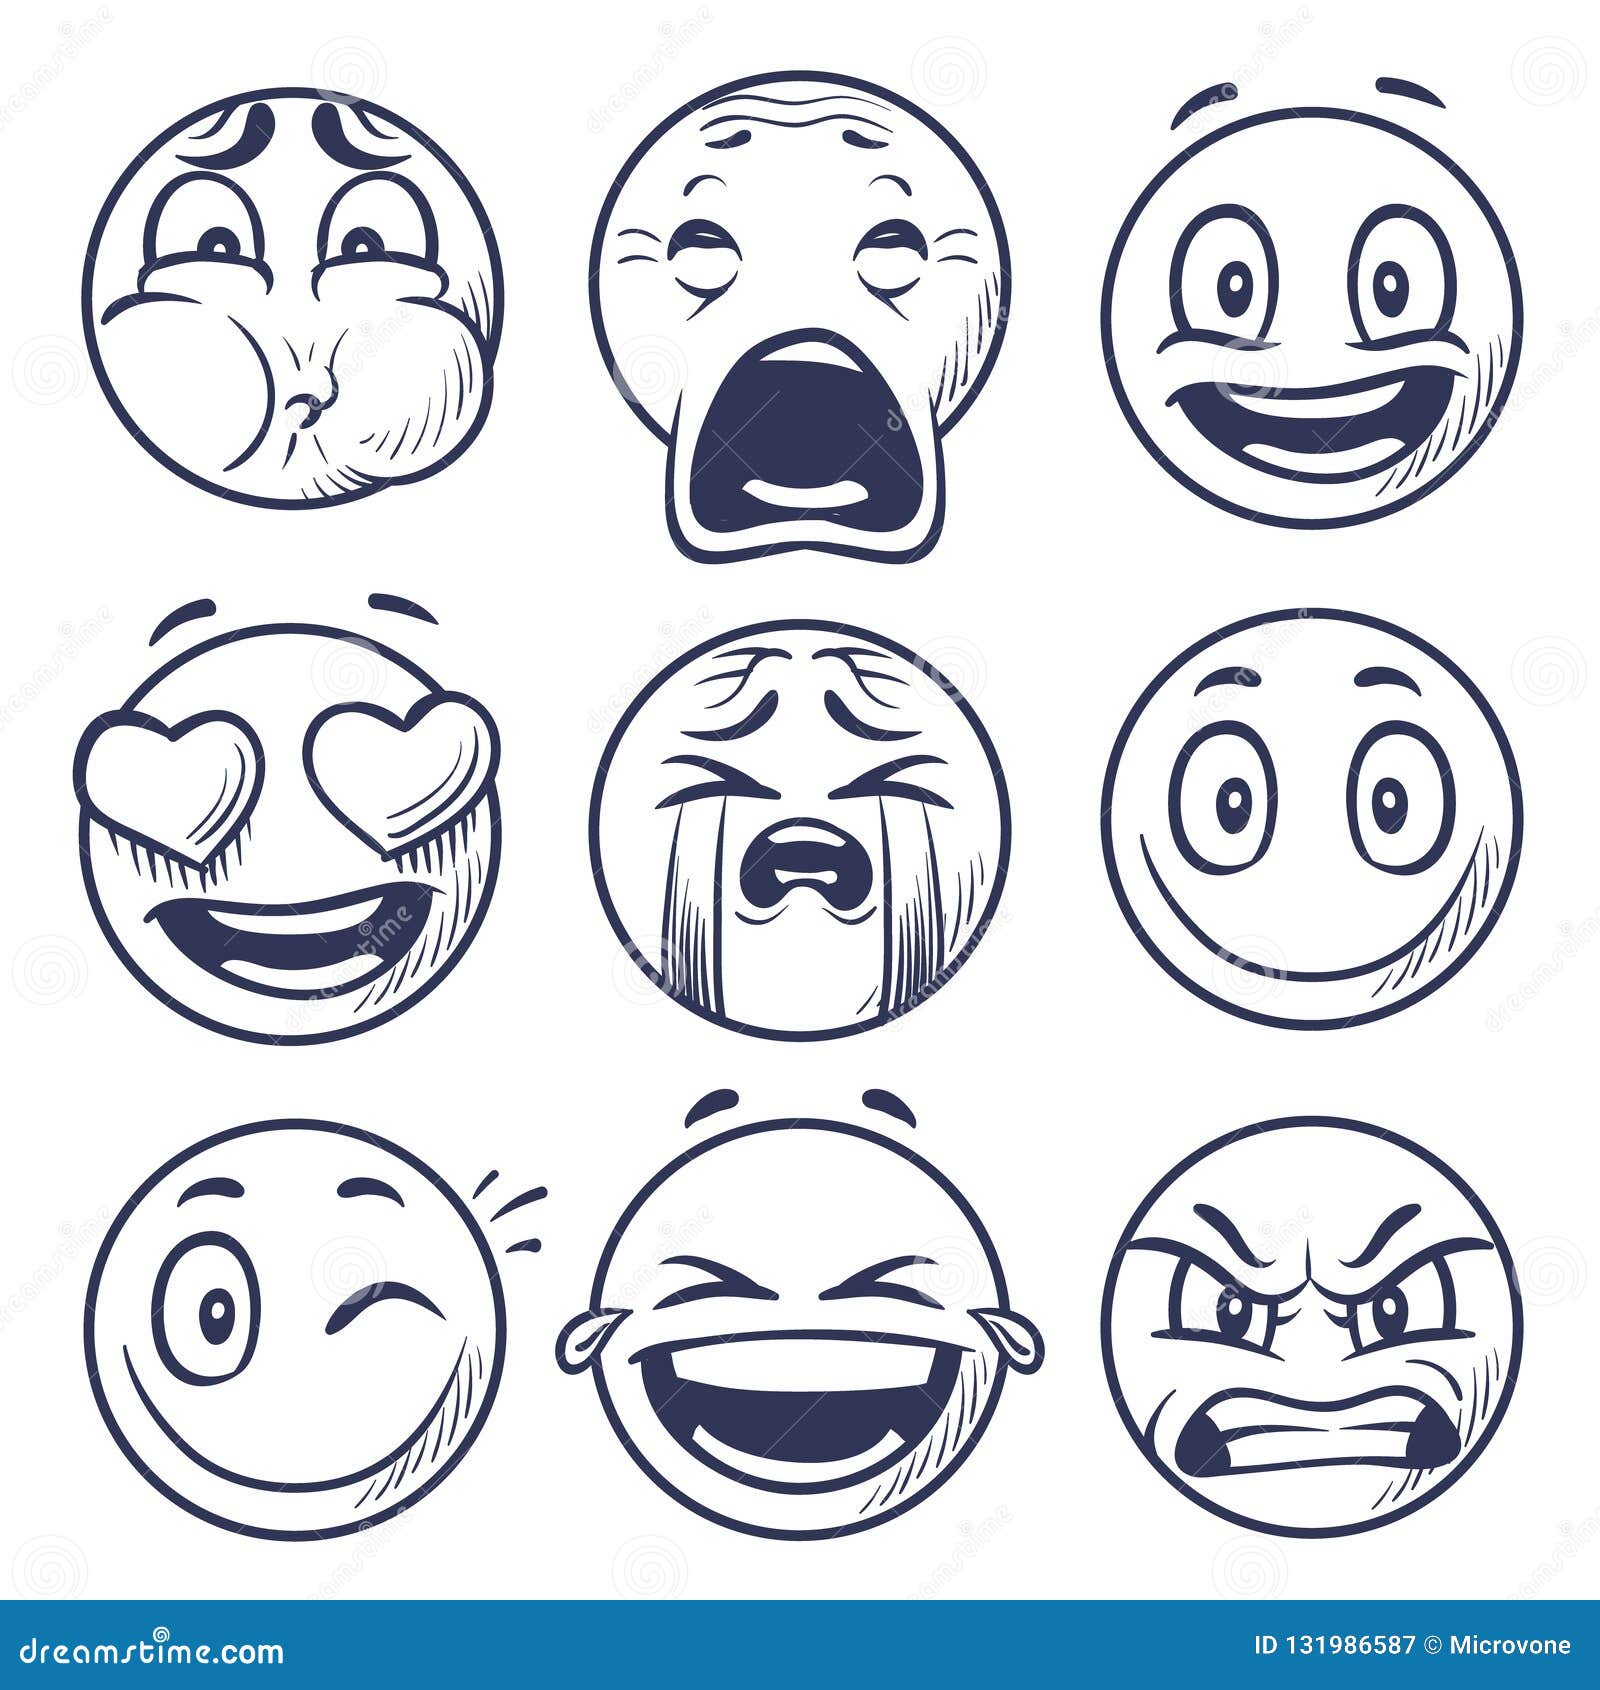 Smile Drawing PNG Transparent Images Free Download | Vector Files | Pngtree